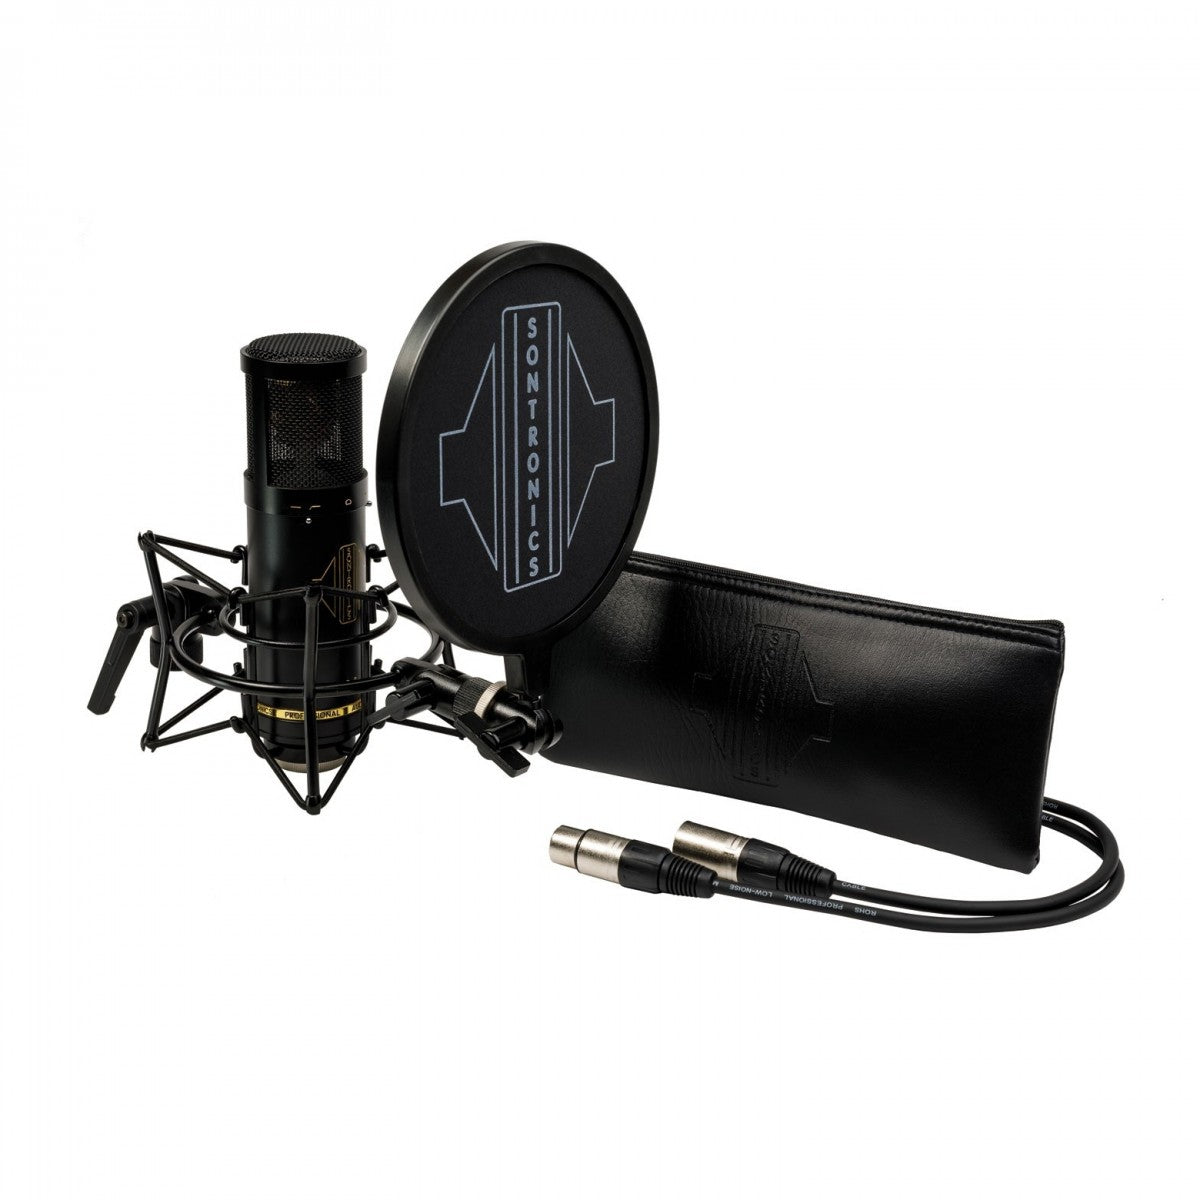 STC-2 Pack: Condenser Microphone Package